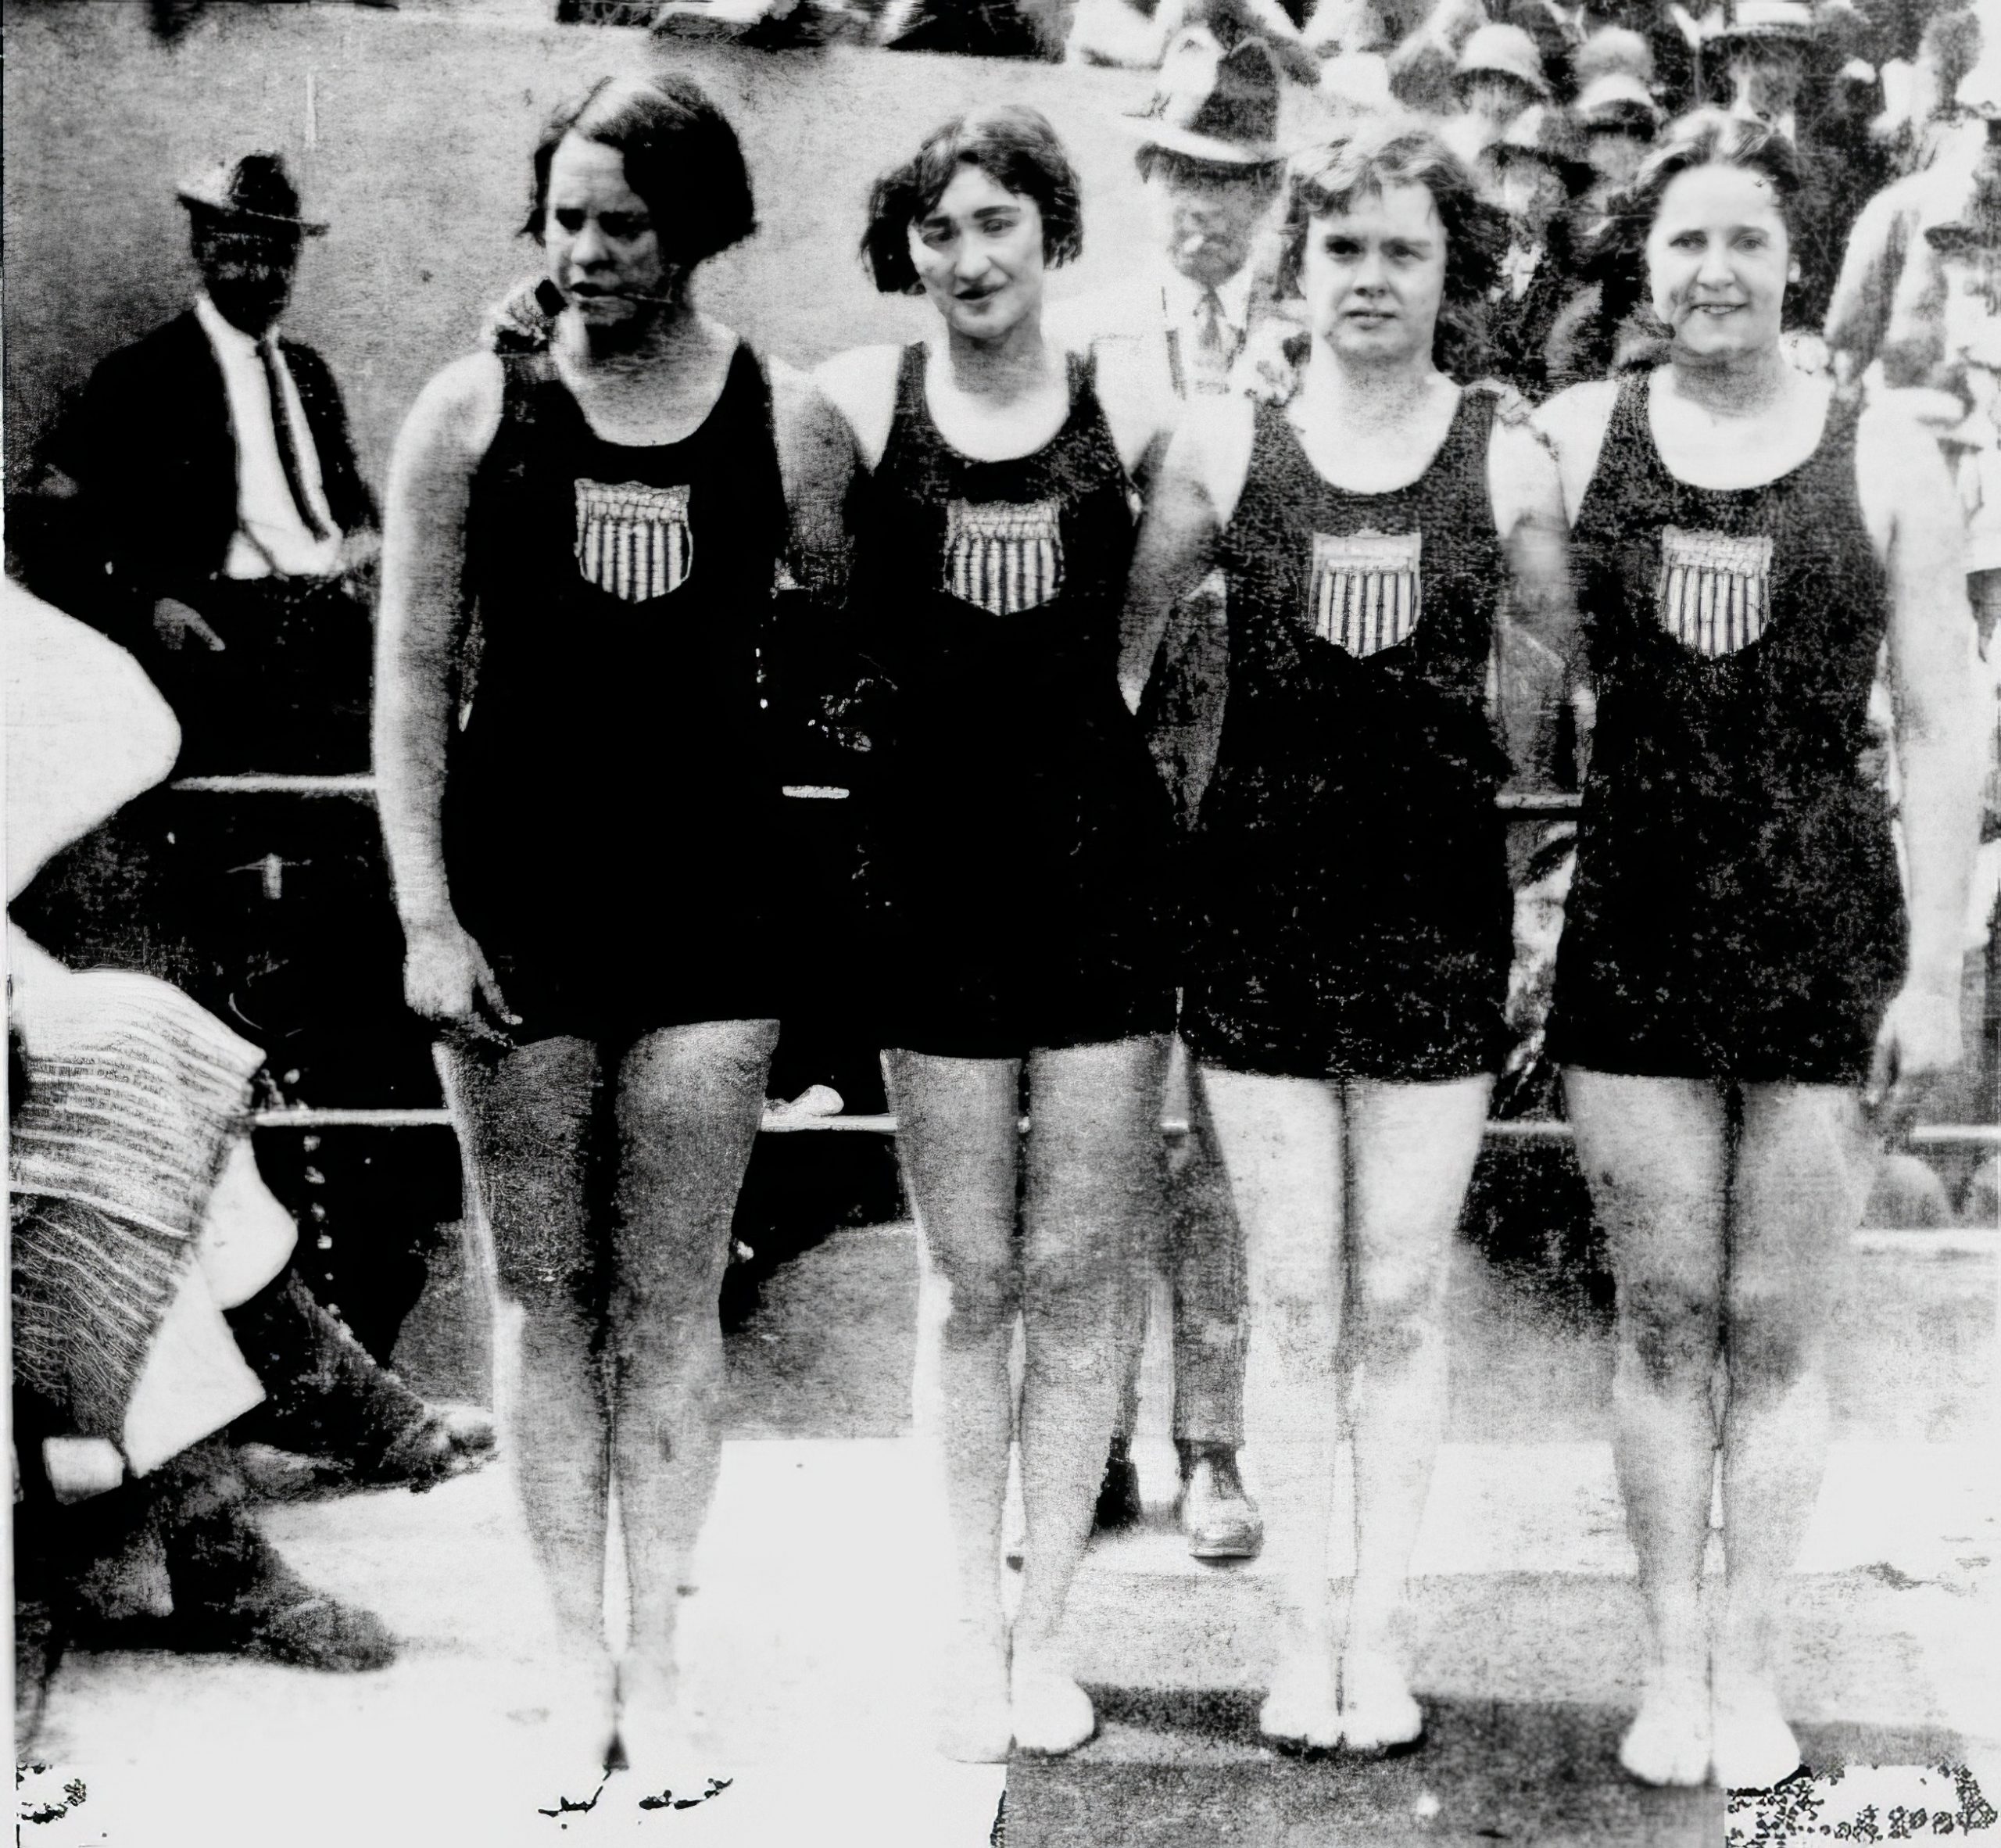 Four young women stand together. They are all in swimsuits.